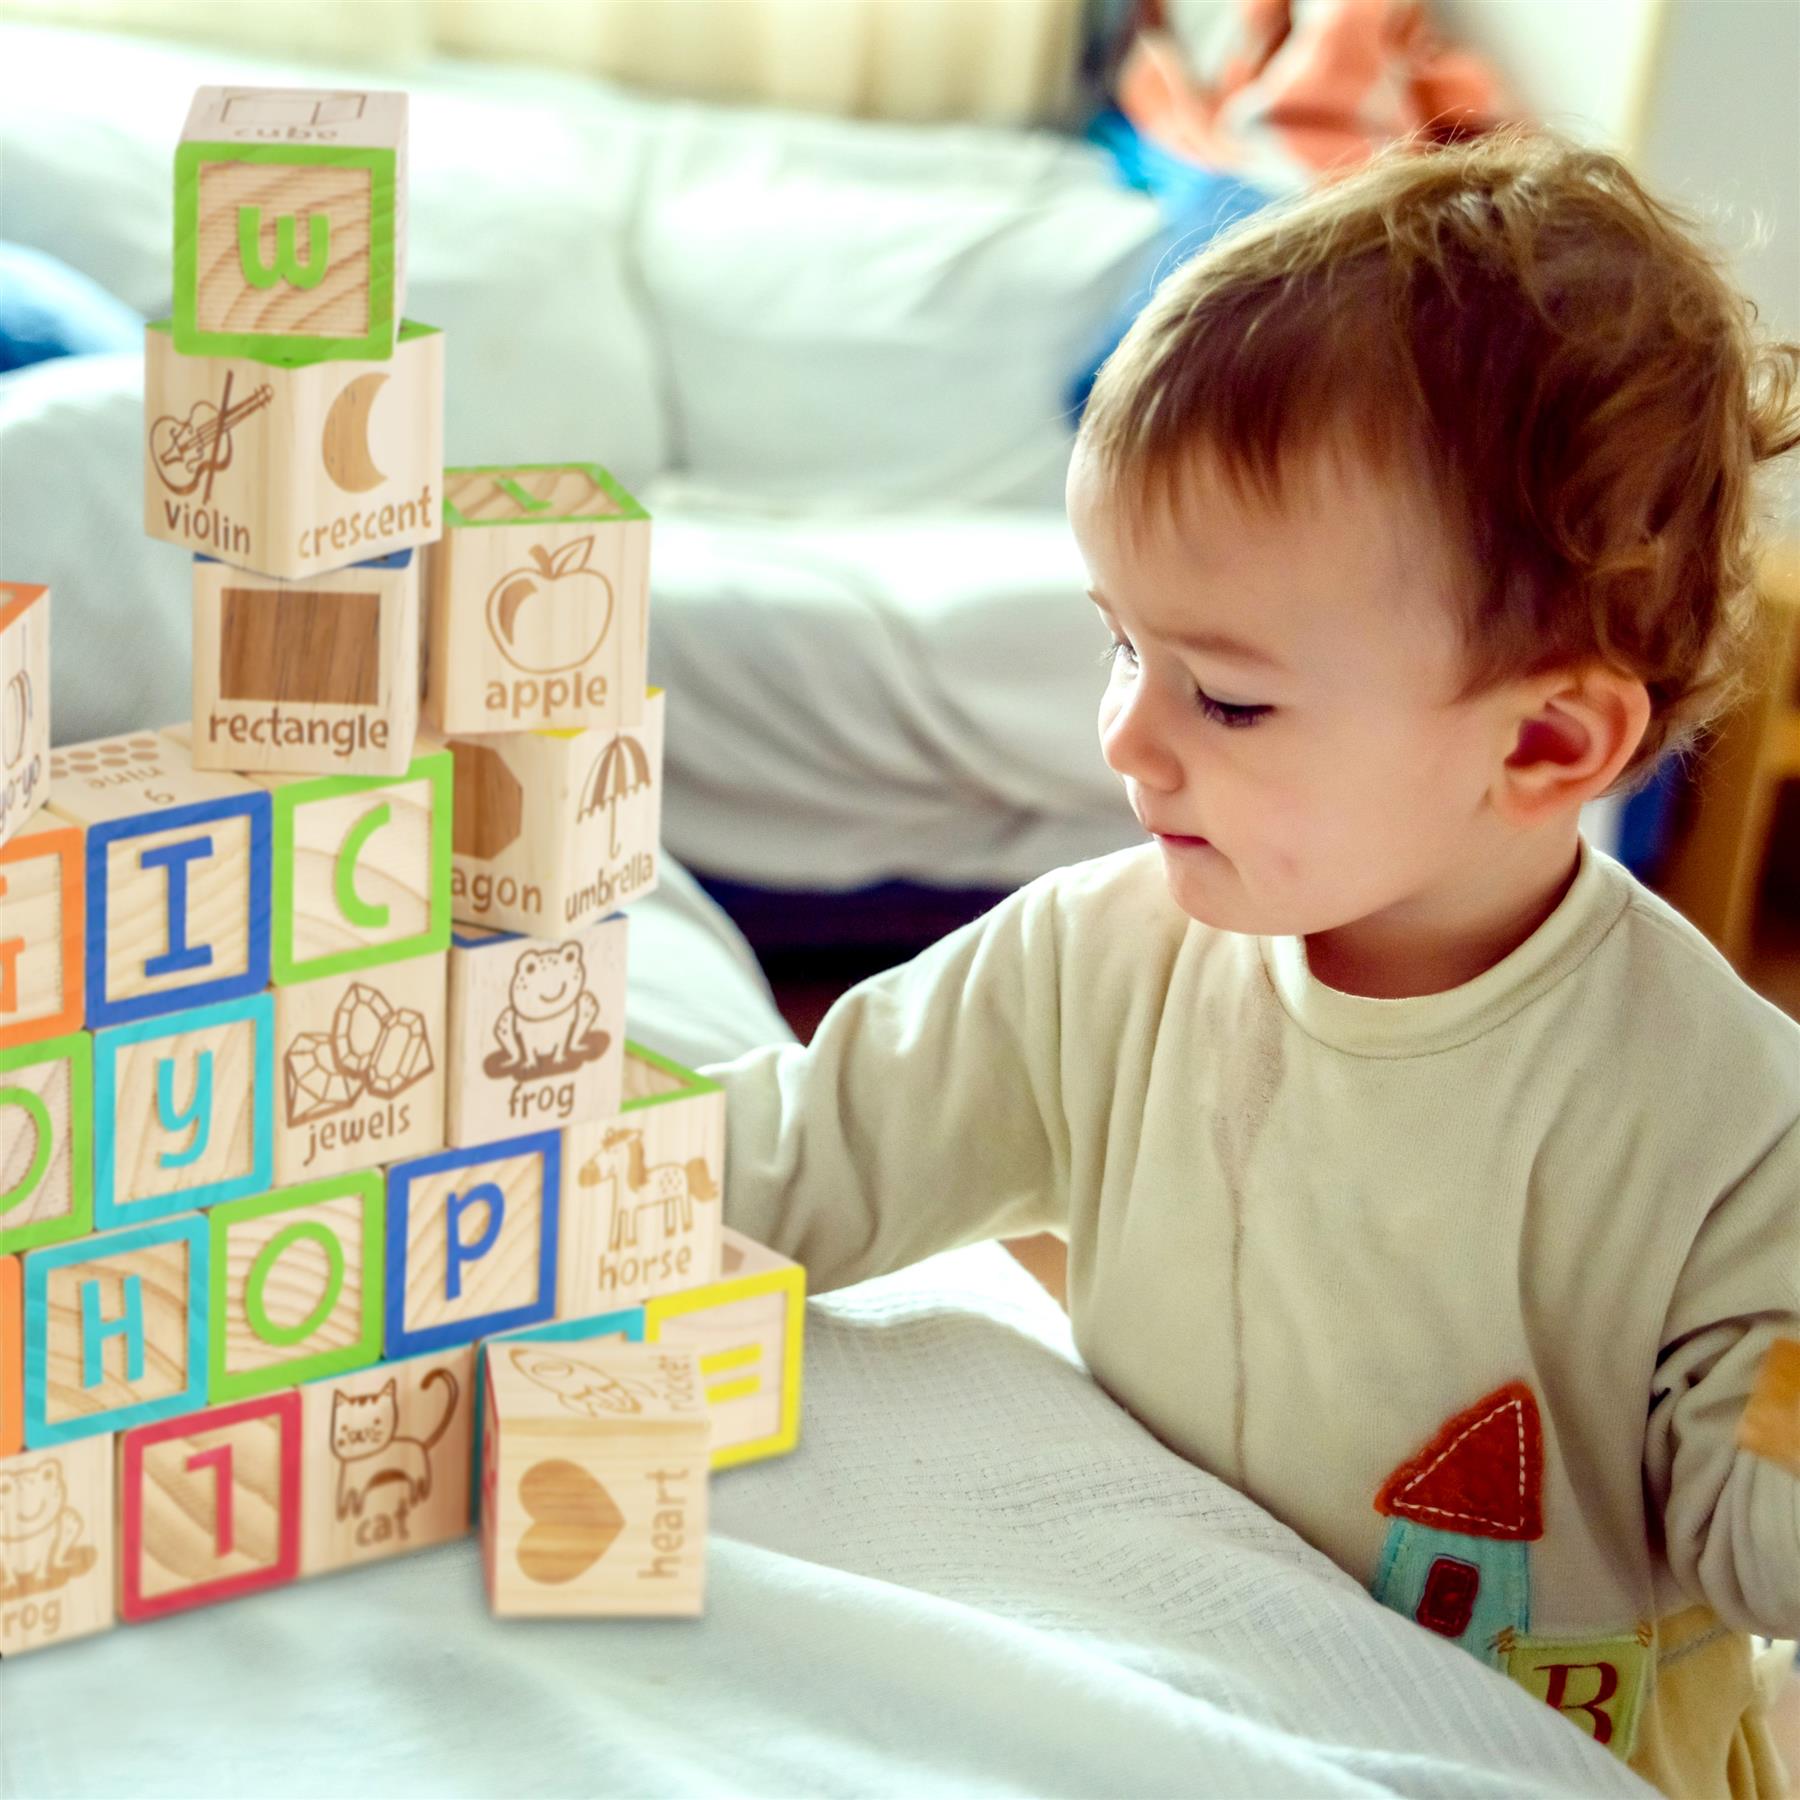 Wooden ABC 123 Block Set Kids Educational Toys by The Magic Toy Shop - The Magic Toy Shop